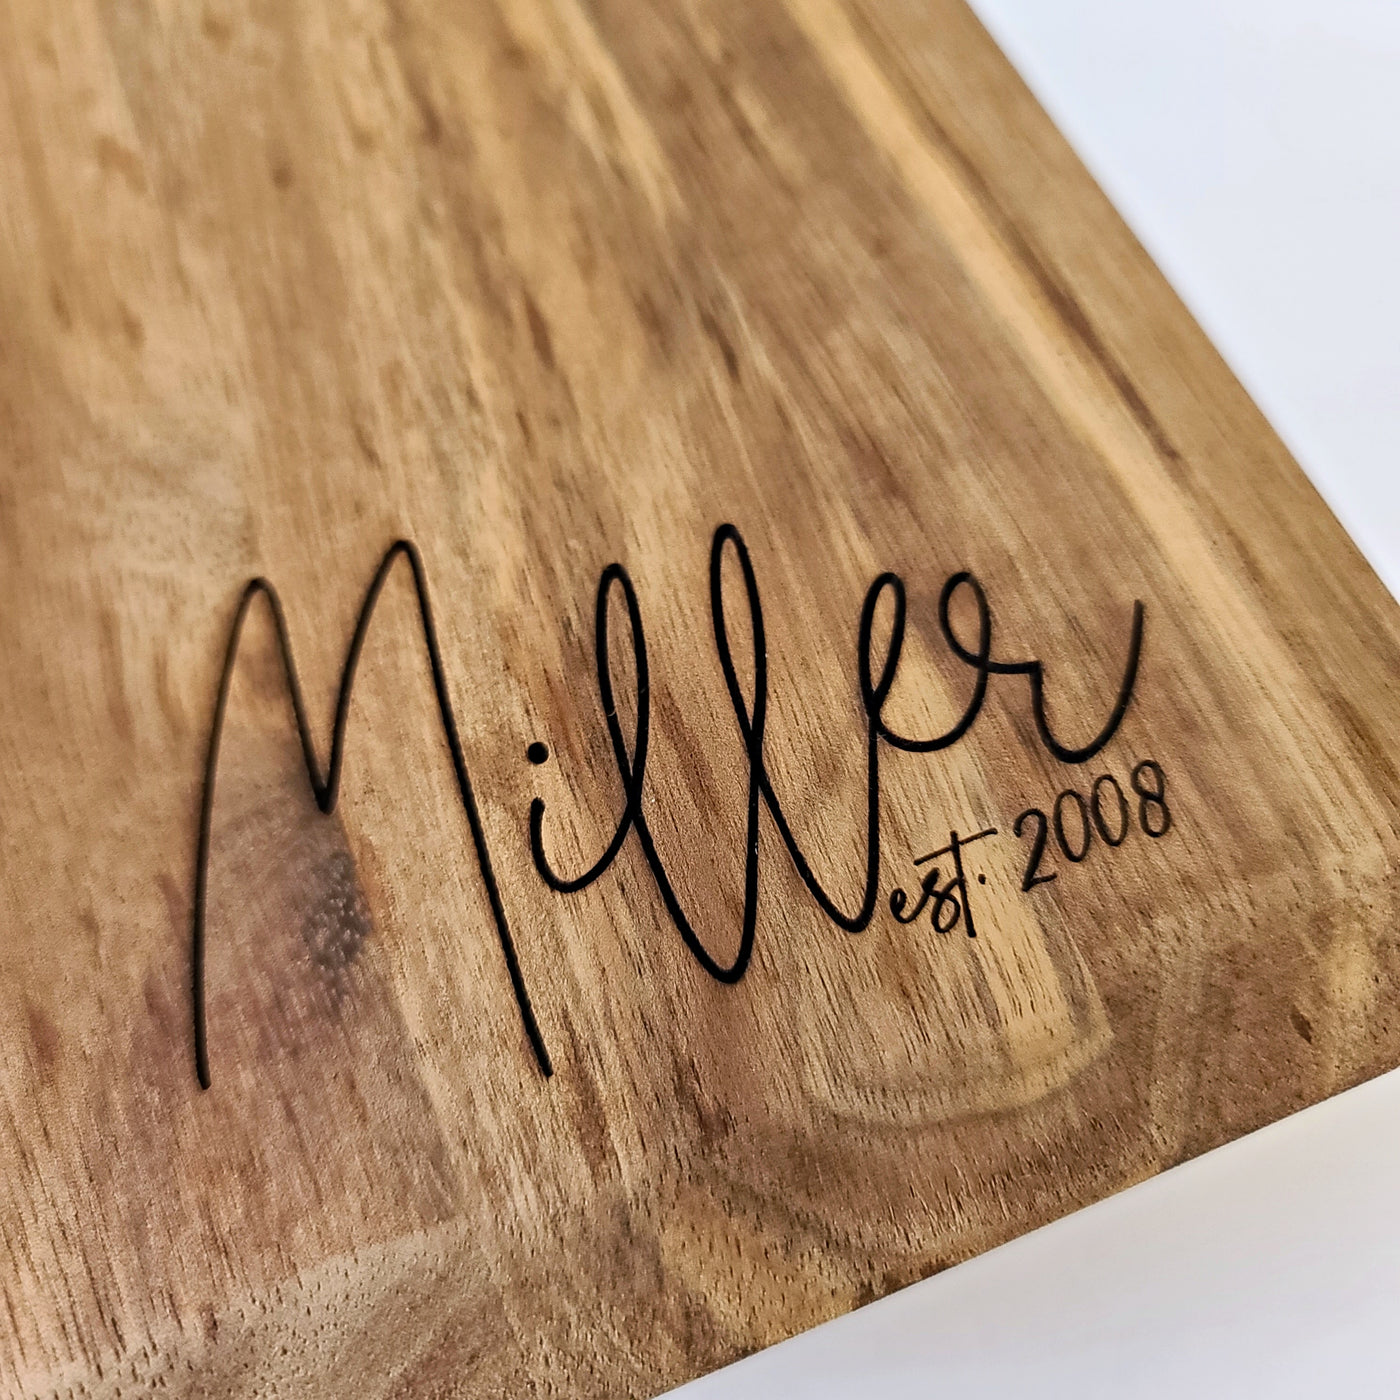 Personalized Engraved Cutting Board with Script Name | Acacia Wood Square Cutting Board